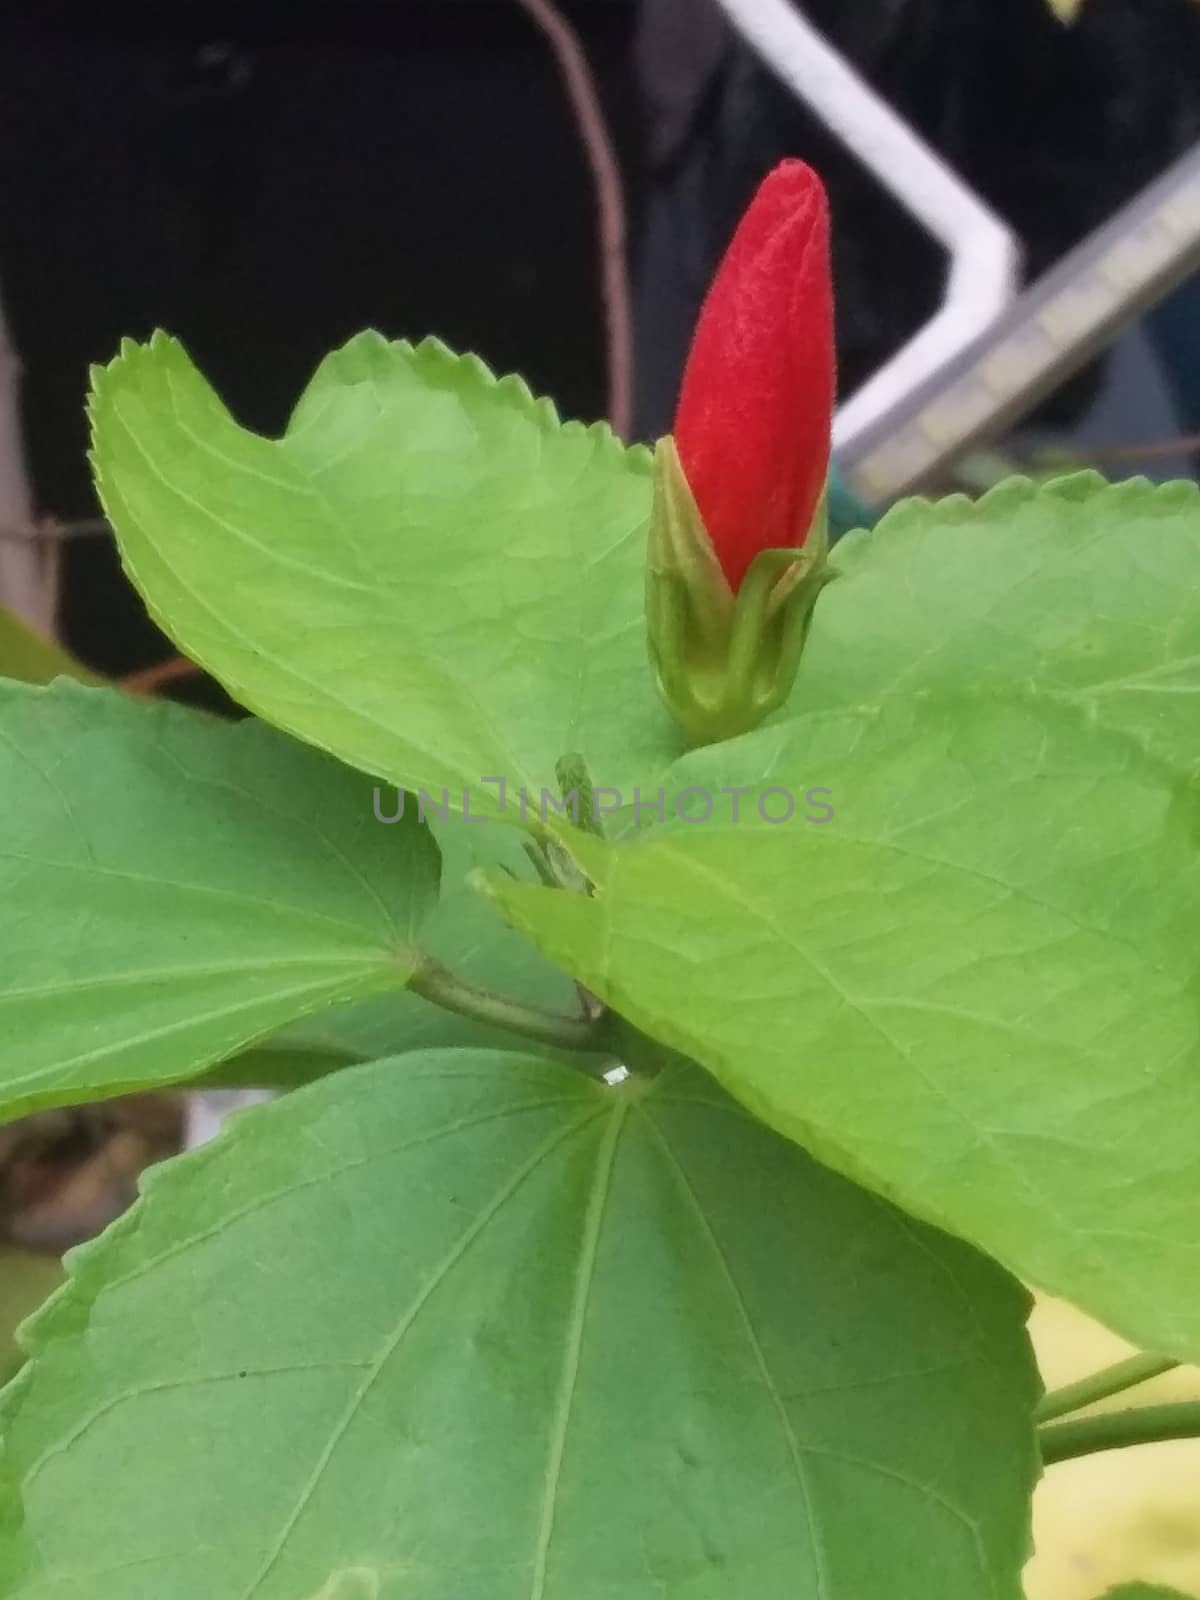 red hibiscus bud with green leaves